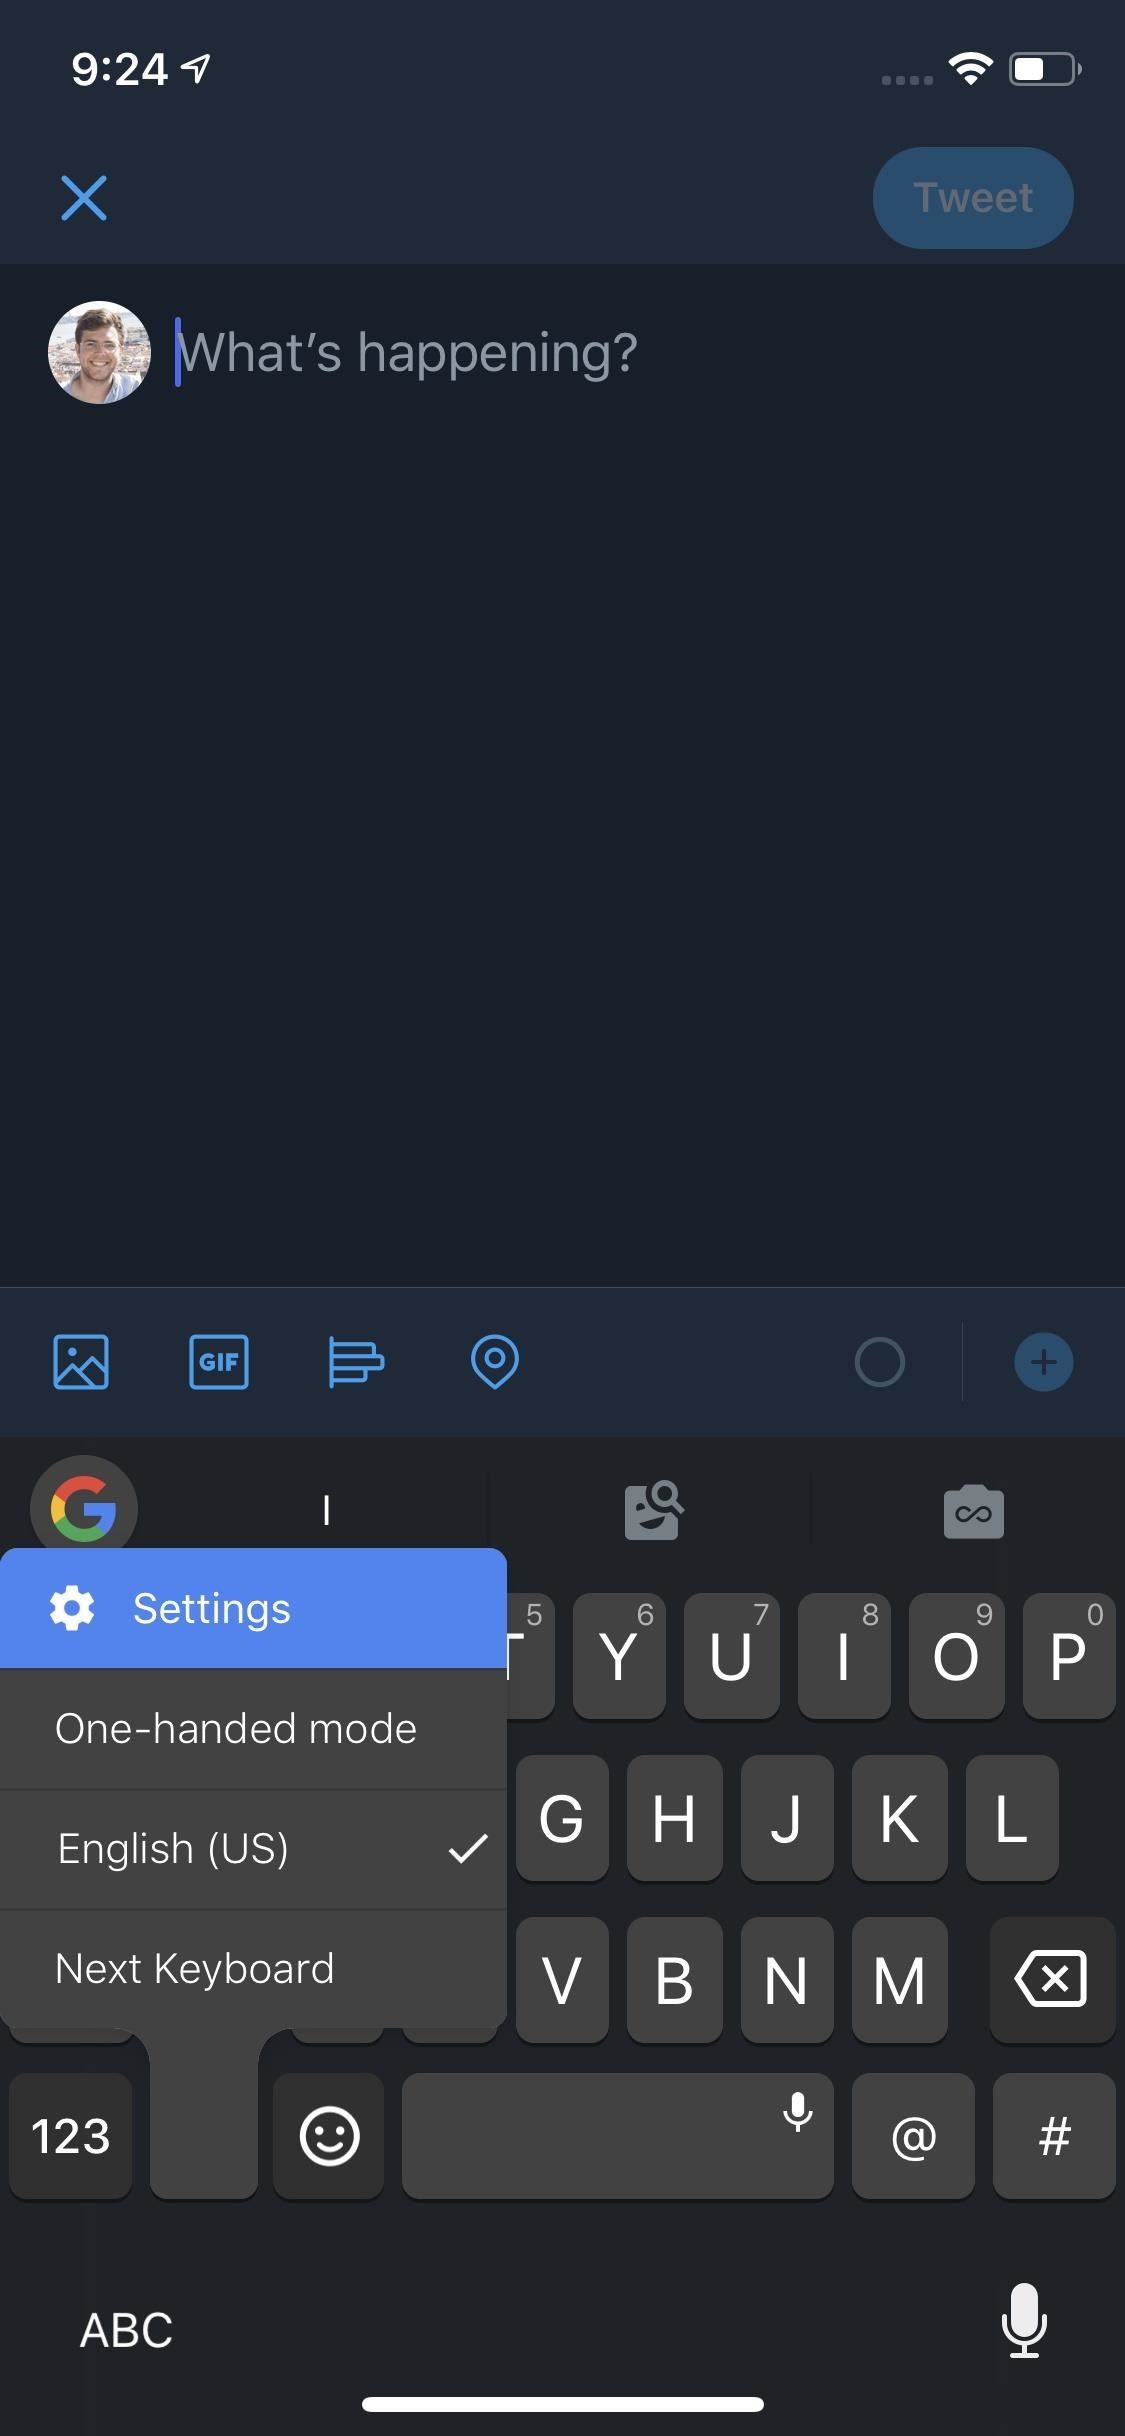 How to Use Gboard's Haptic Feedback on Your iPhone to Feel Everything You Type